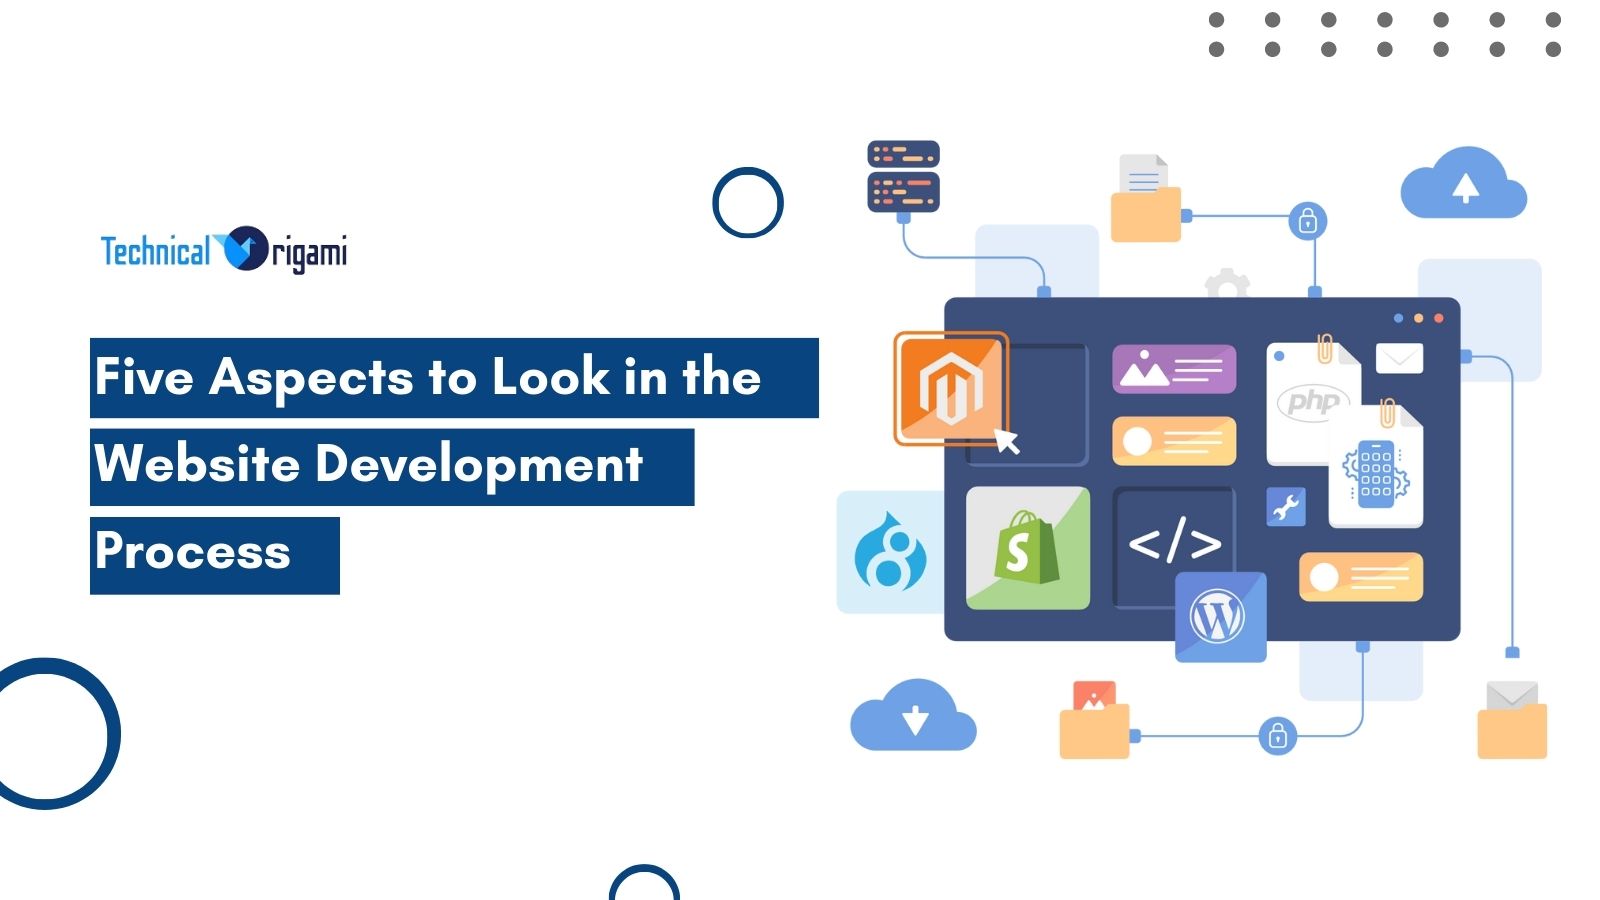 Five Aspects to Look in the Website Development Process